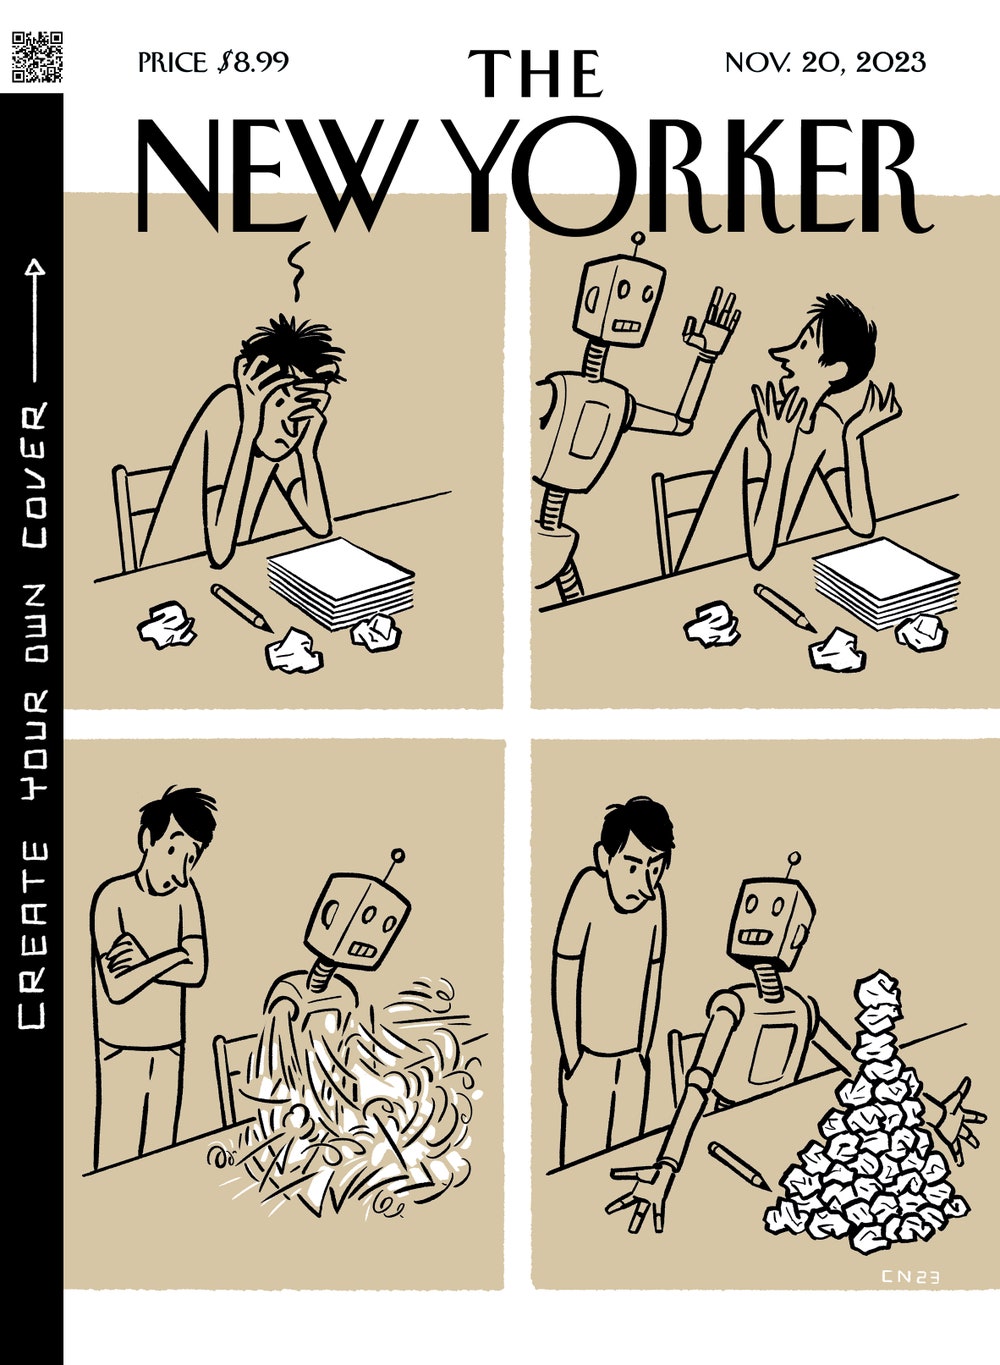 New Yorker cover cartoon. 1st panel: a writer sits frustrated with his head in his hands, blank paper in front of him, and crumpled rejected drafts next to him. 2nd panel: a friendly robot comes to greet him. 3rd panel: the friendly robot gets to work quickly on the sheet of blank paper as the writer looks on. 4th panel: friendly robot shows off his completed work, which is a towering pile of rejected drafts.